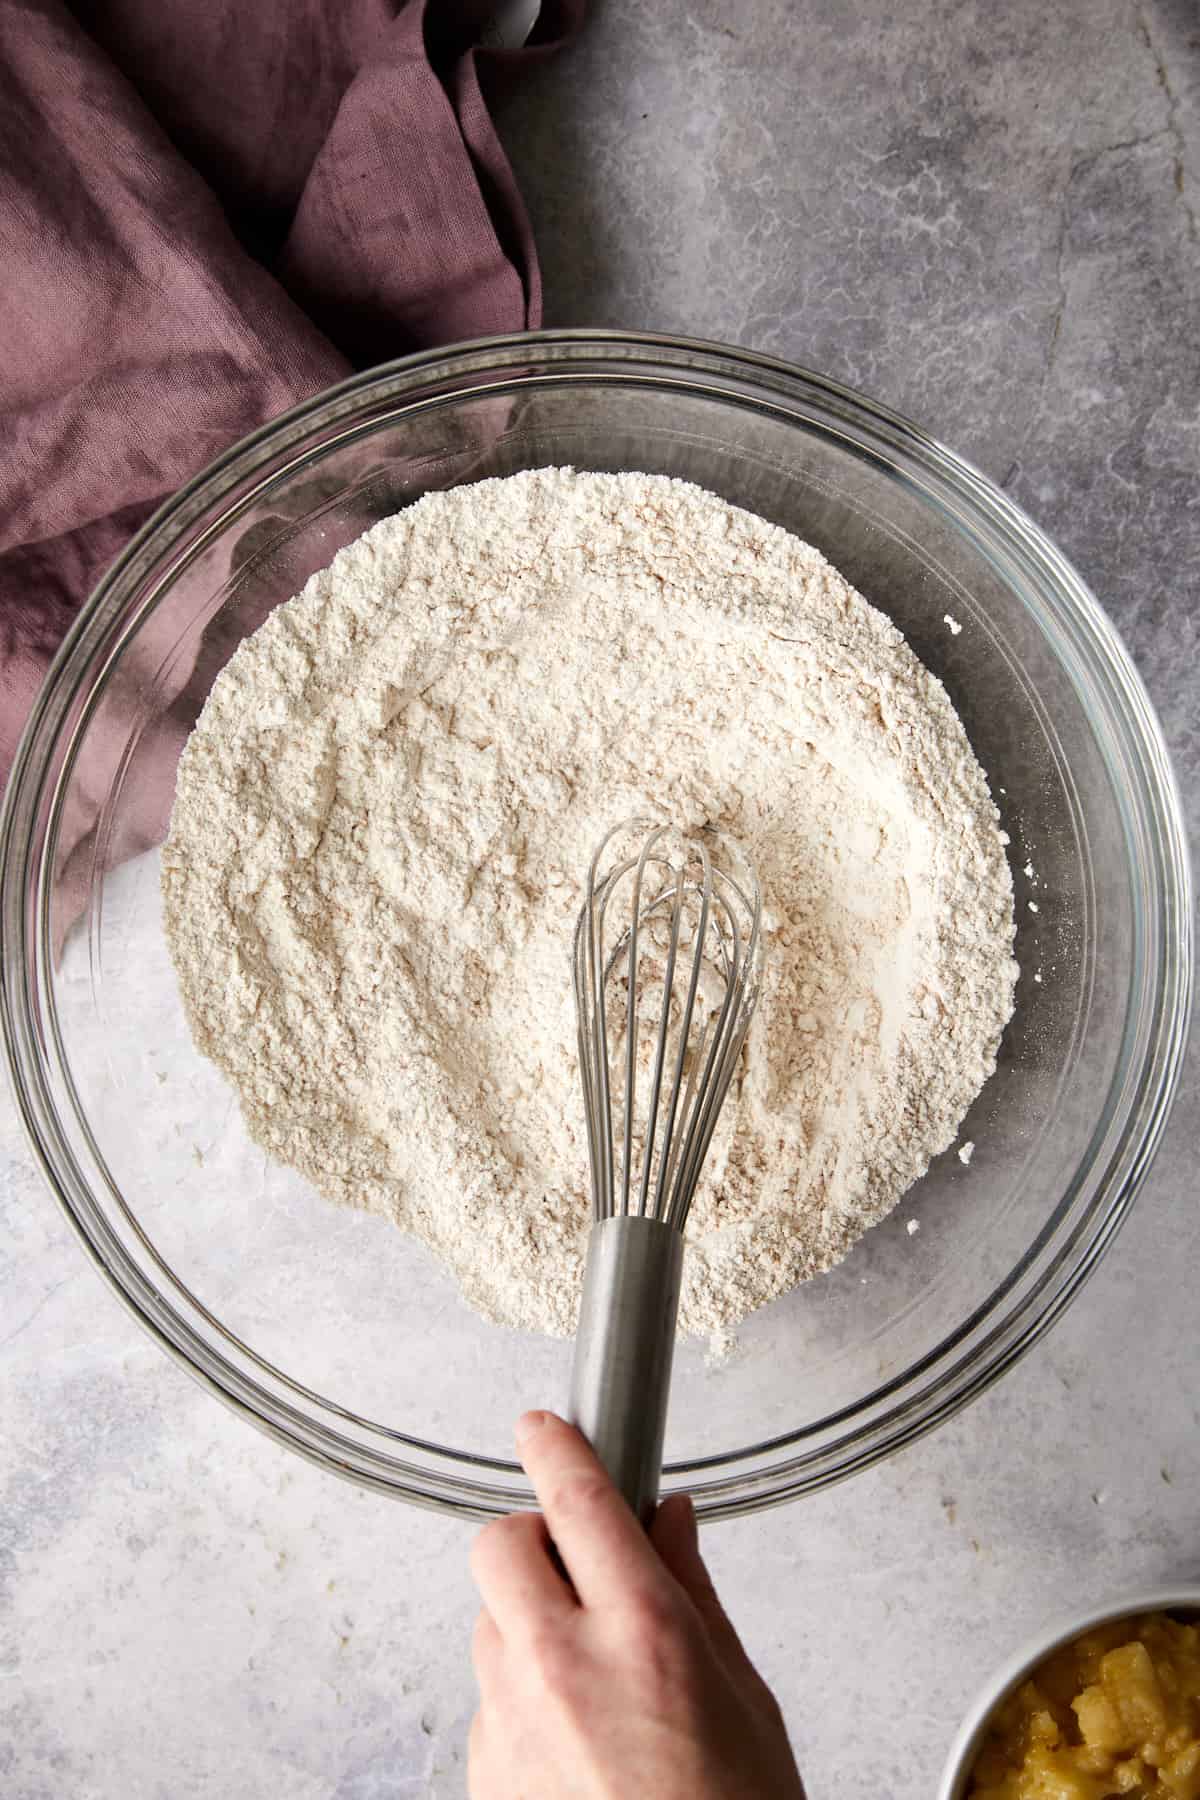 Overhead view of dry ingredients mixed together with a hand on a metal whisk.